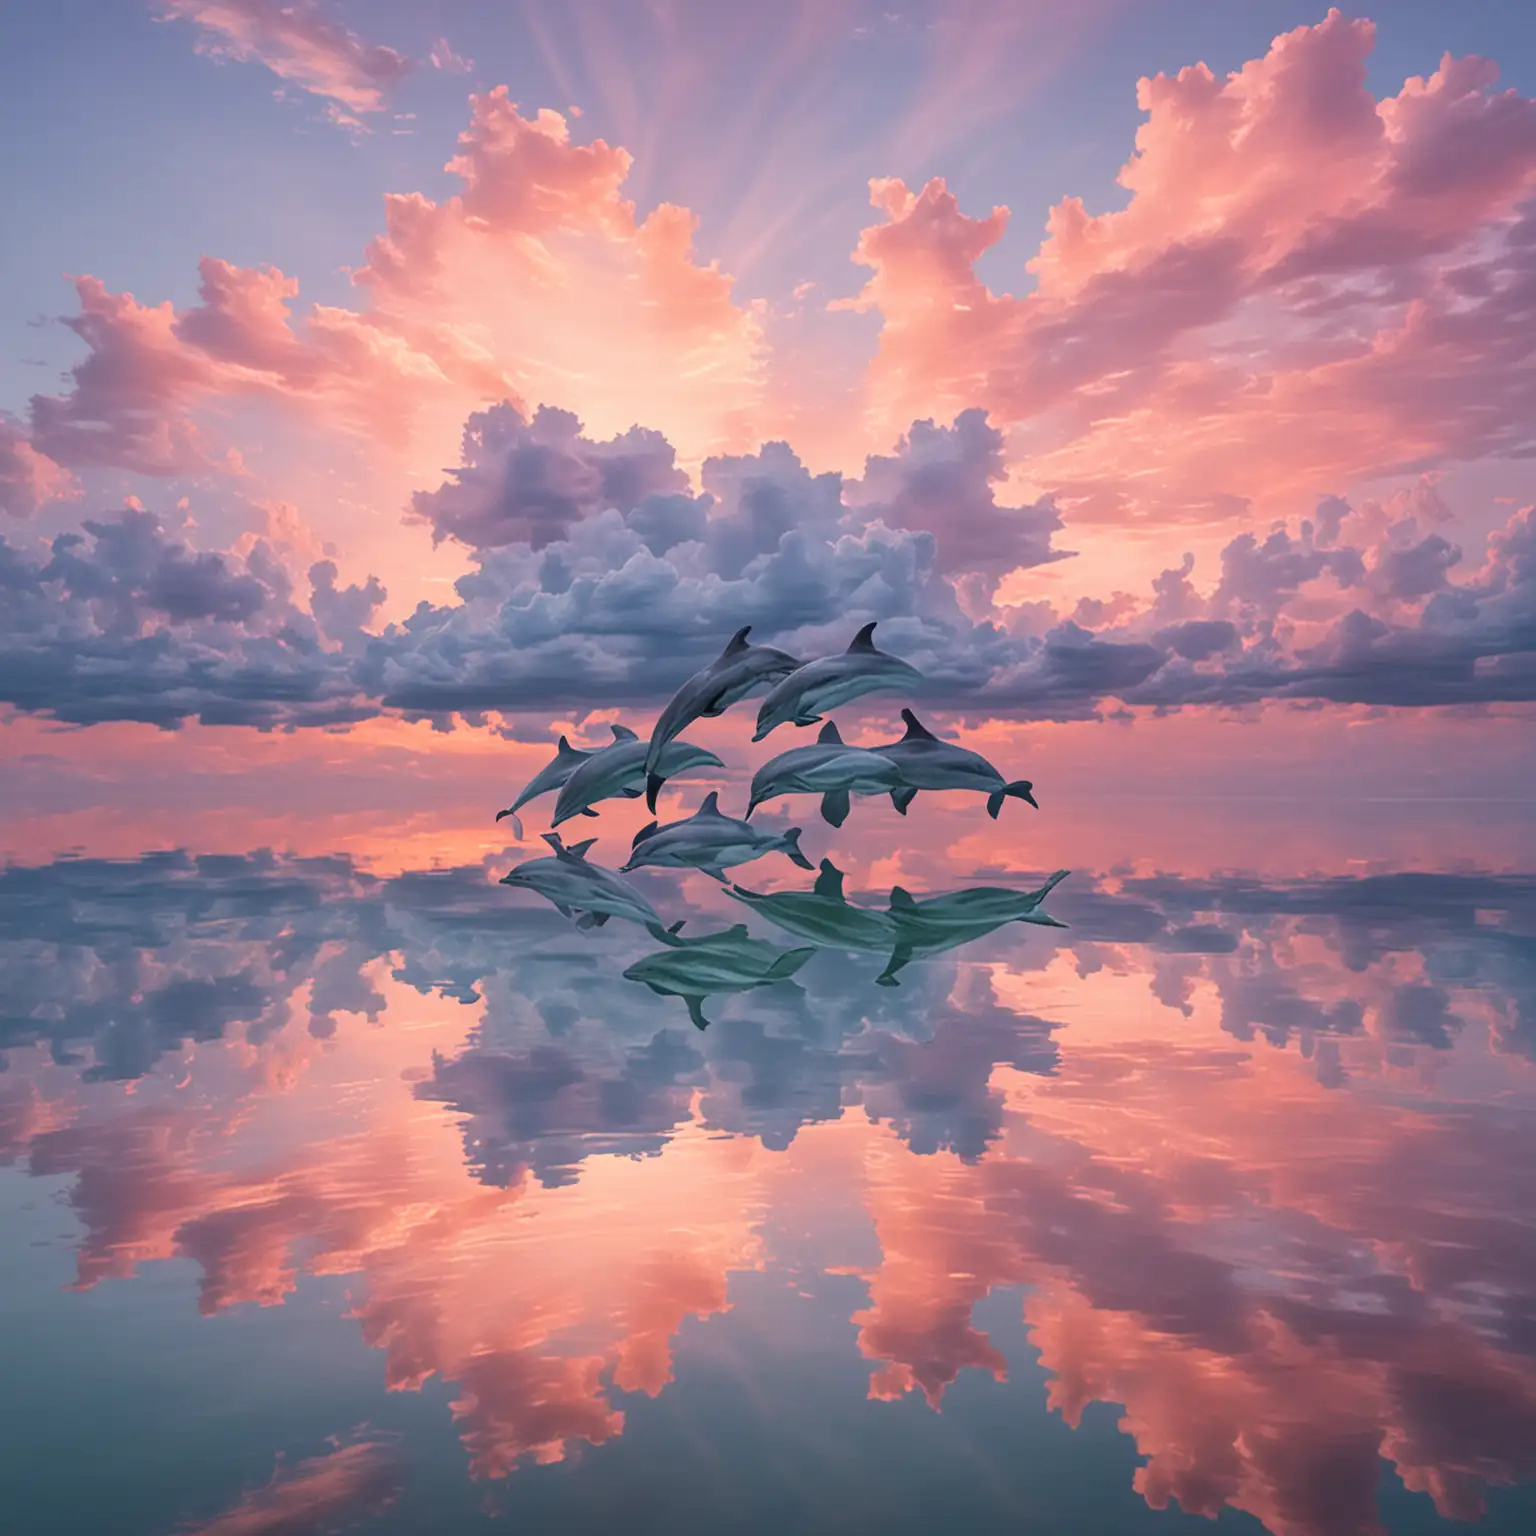 Pastel Clouds Reflecting in Water with Dolphins